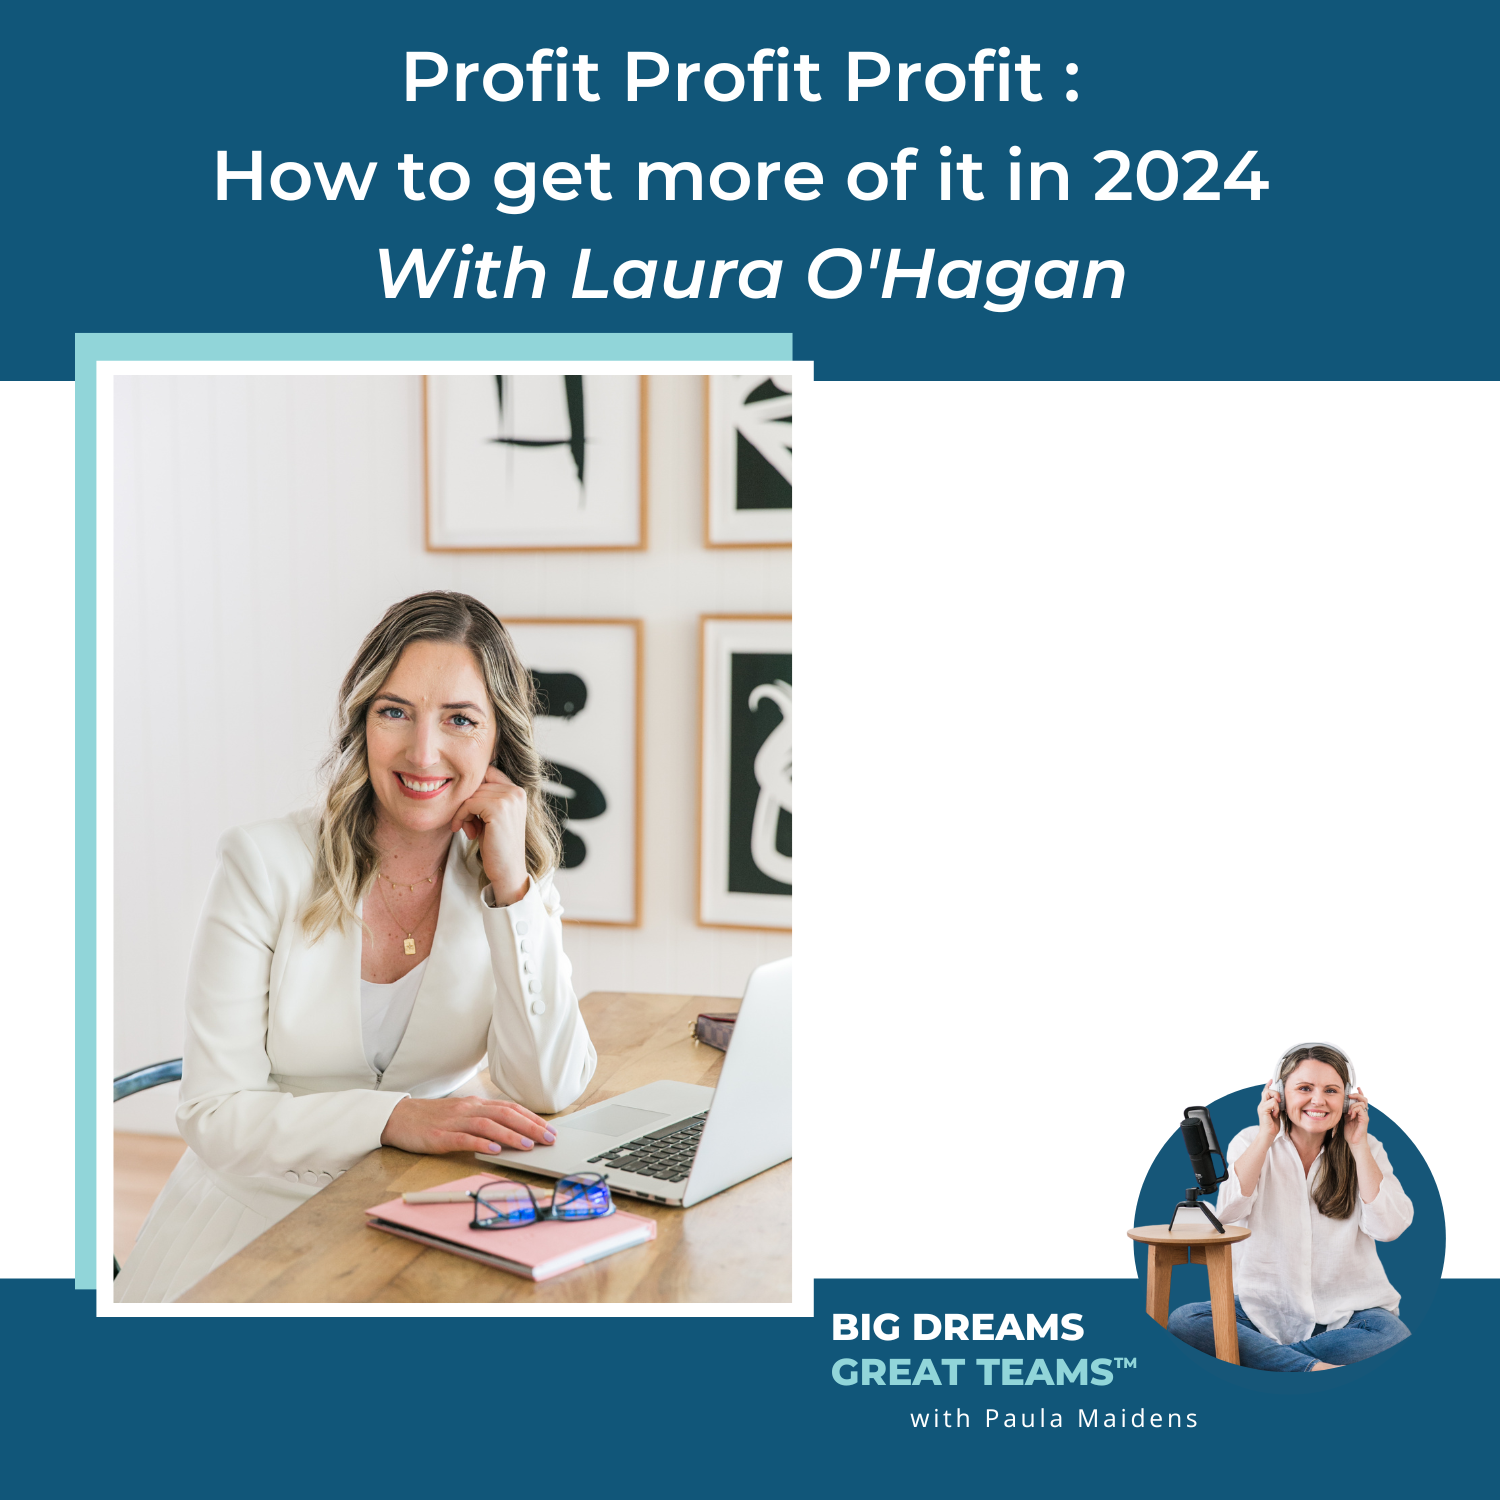 Ep 111: Laura O'Hagan - Paula Maidens Profit Profit Profit : How to get more of it in 2024